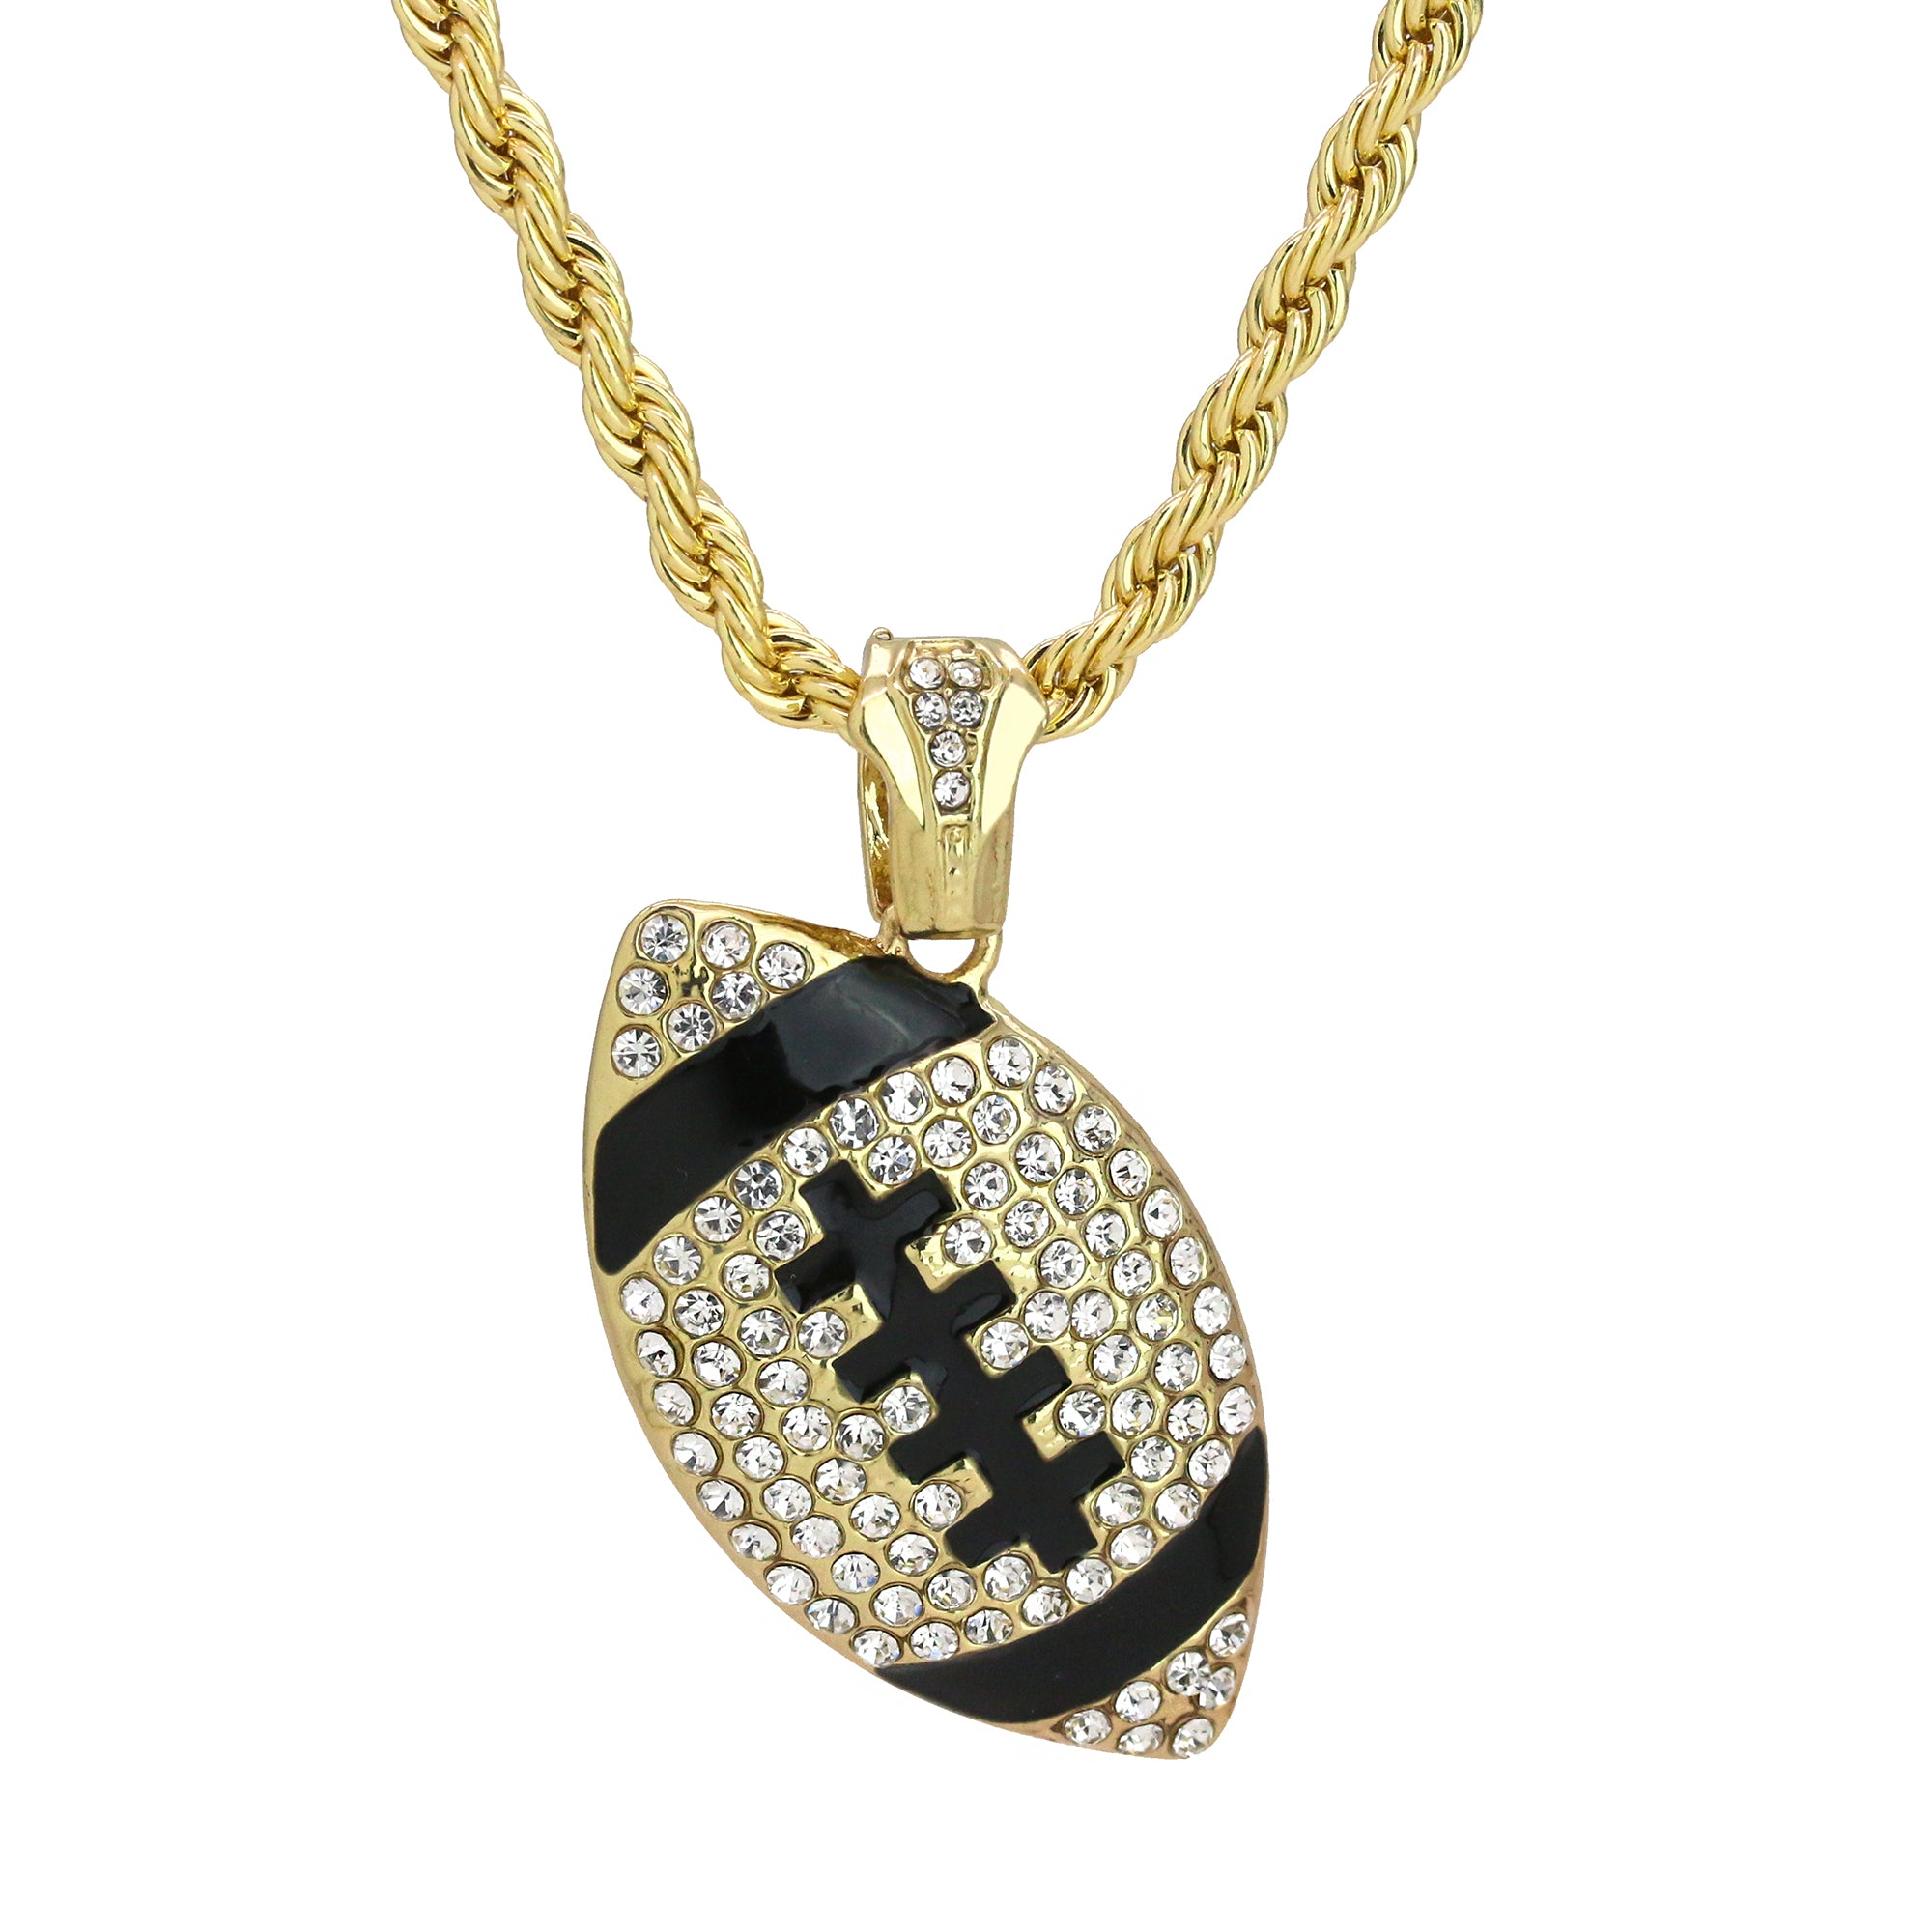 Fully Cz Football Pendant 18K 24" Rope Chain Hip Hop Jewelry